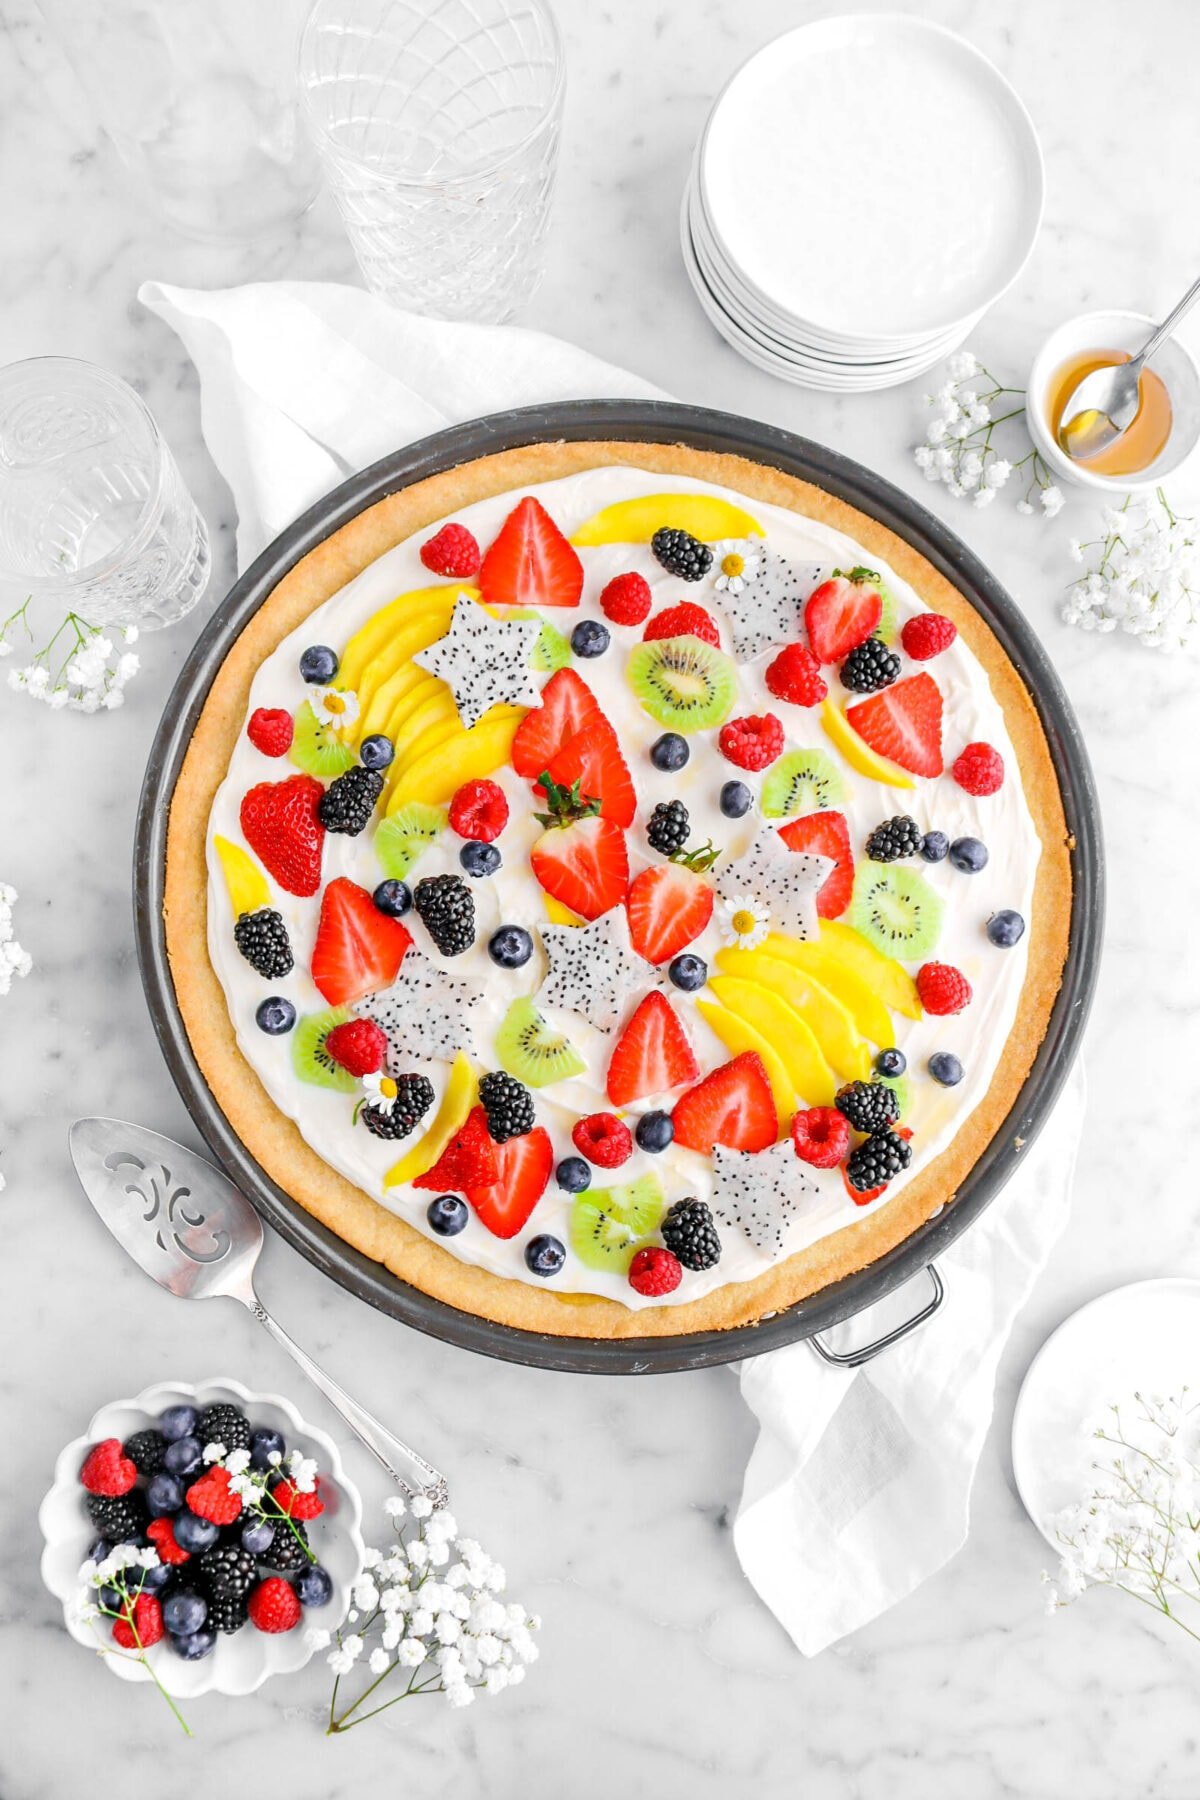 Sugar Cookie Fruit Pizza with Cream Cheese Frosting